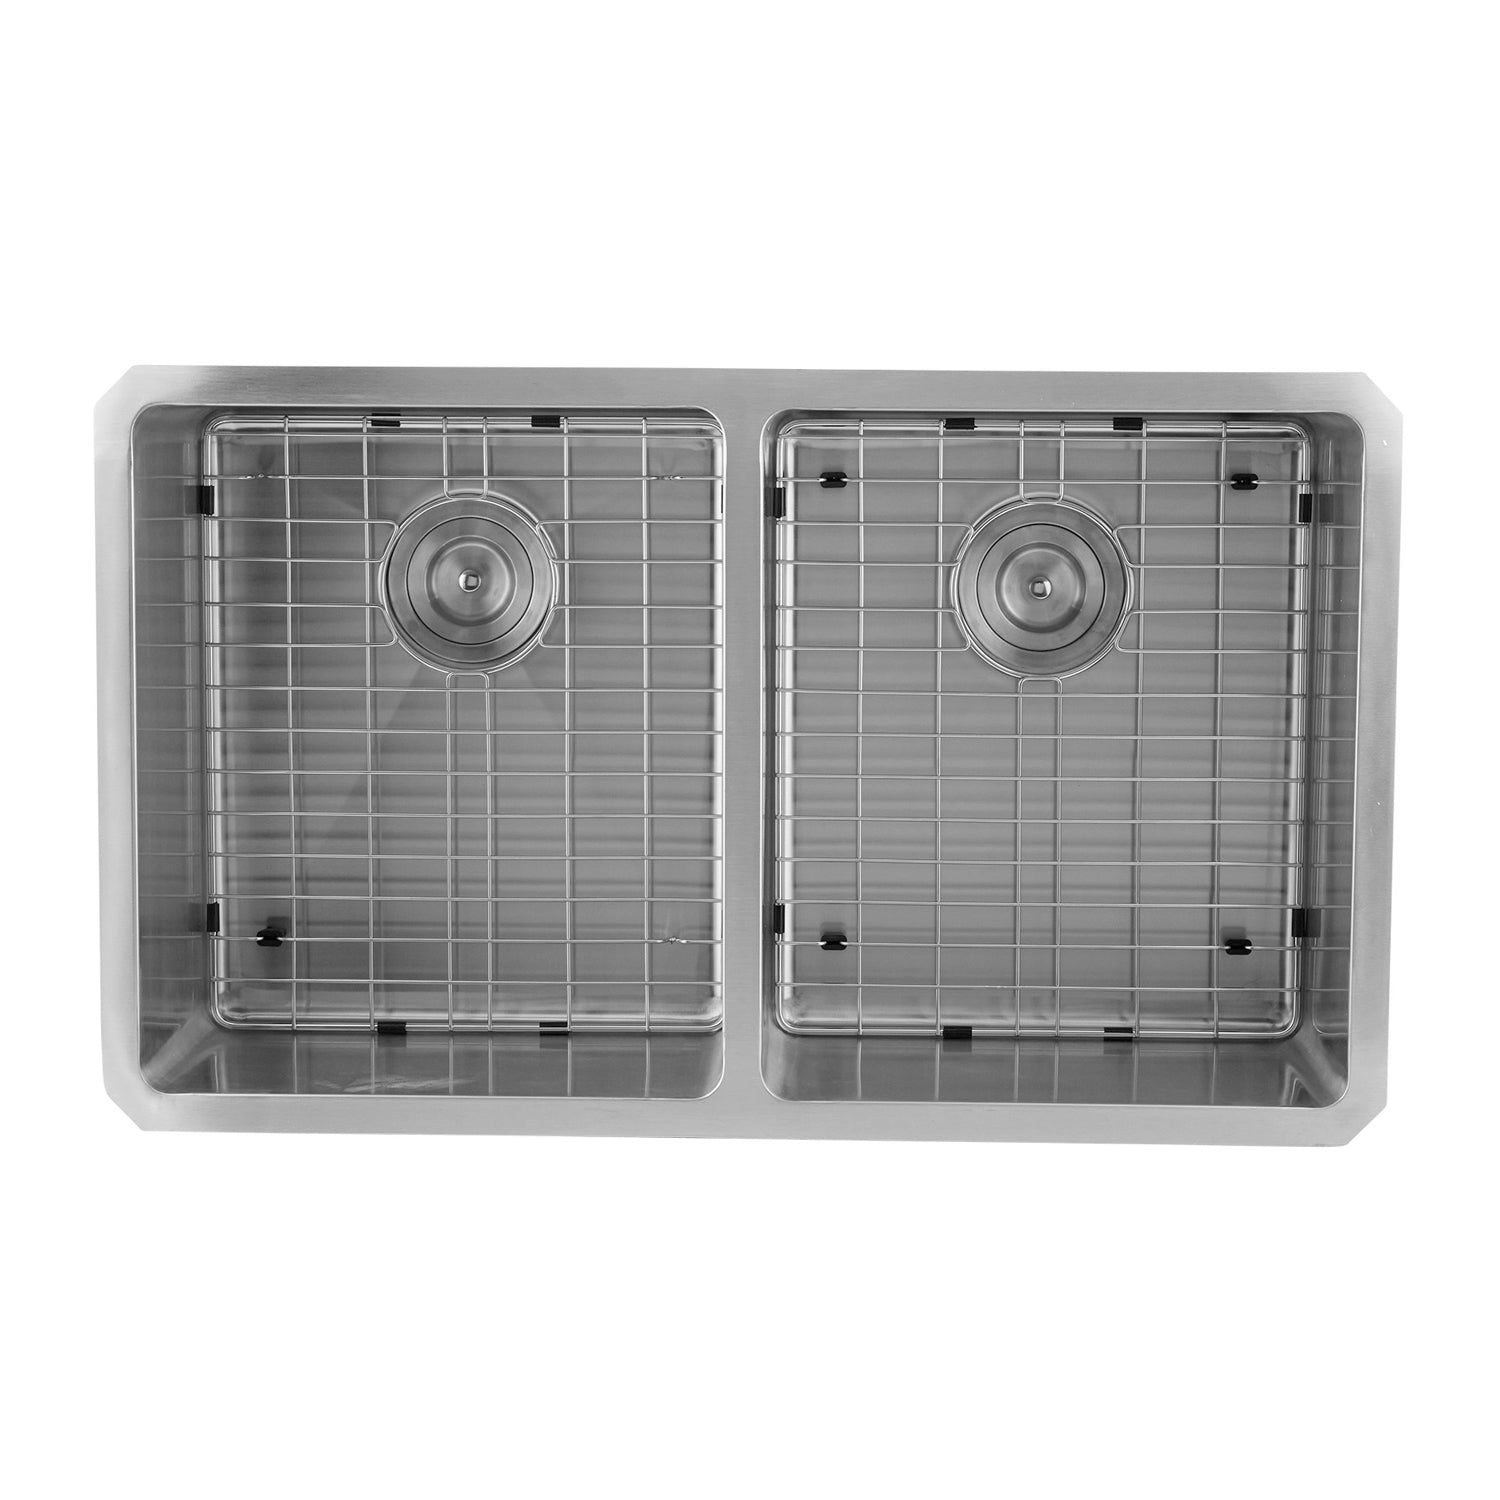 DAX 50/50 Double Bowl Undermount Kitchen Sink, 18 Gauge Stainless Steel, Brushed Finish , 32 x 19 x 9 Inches (DAX-3118B)